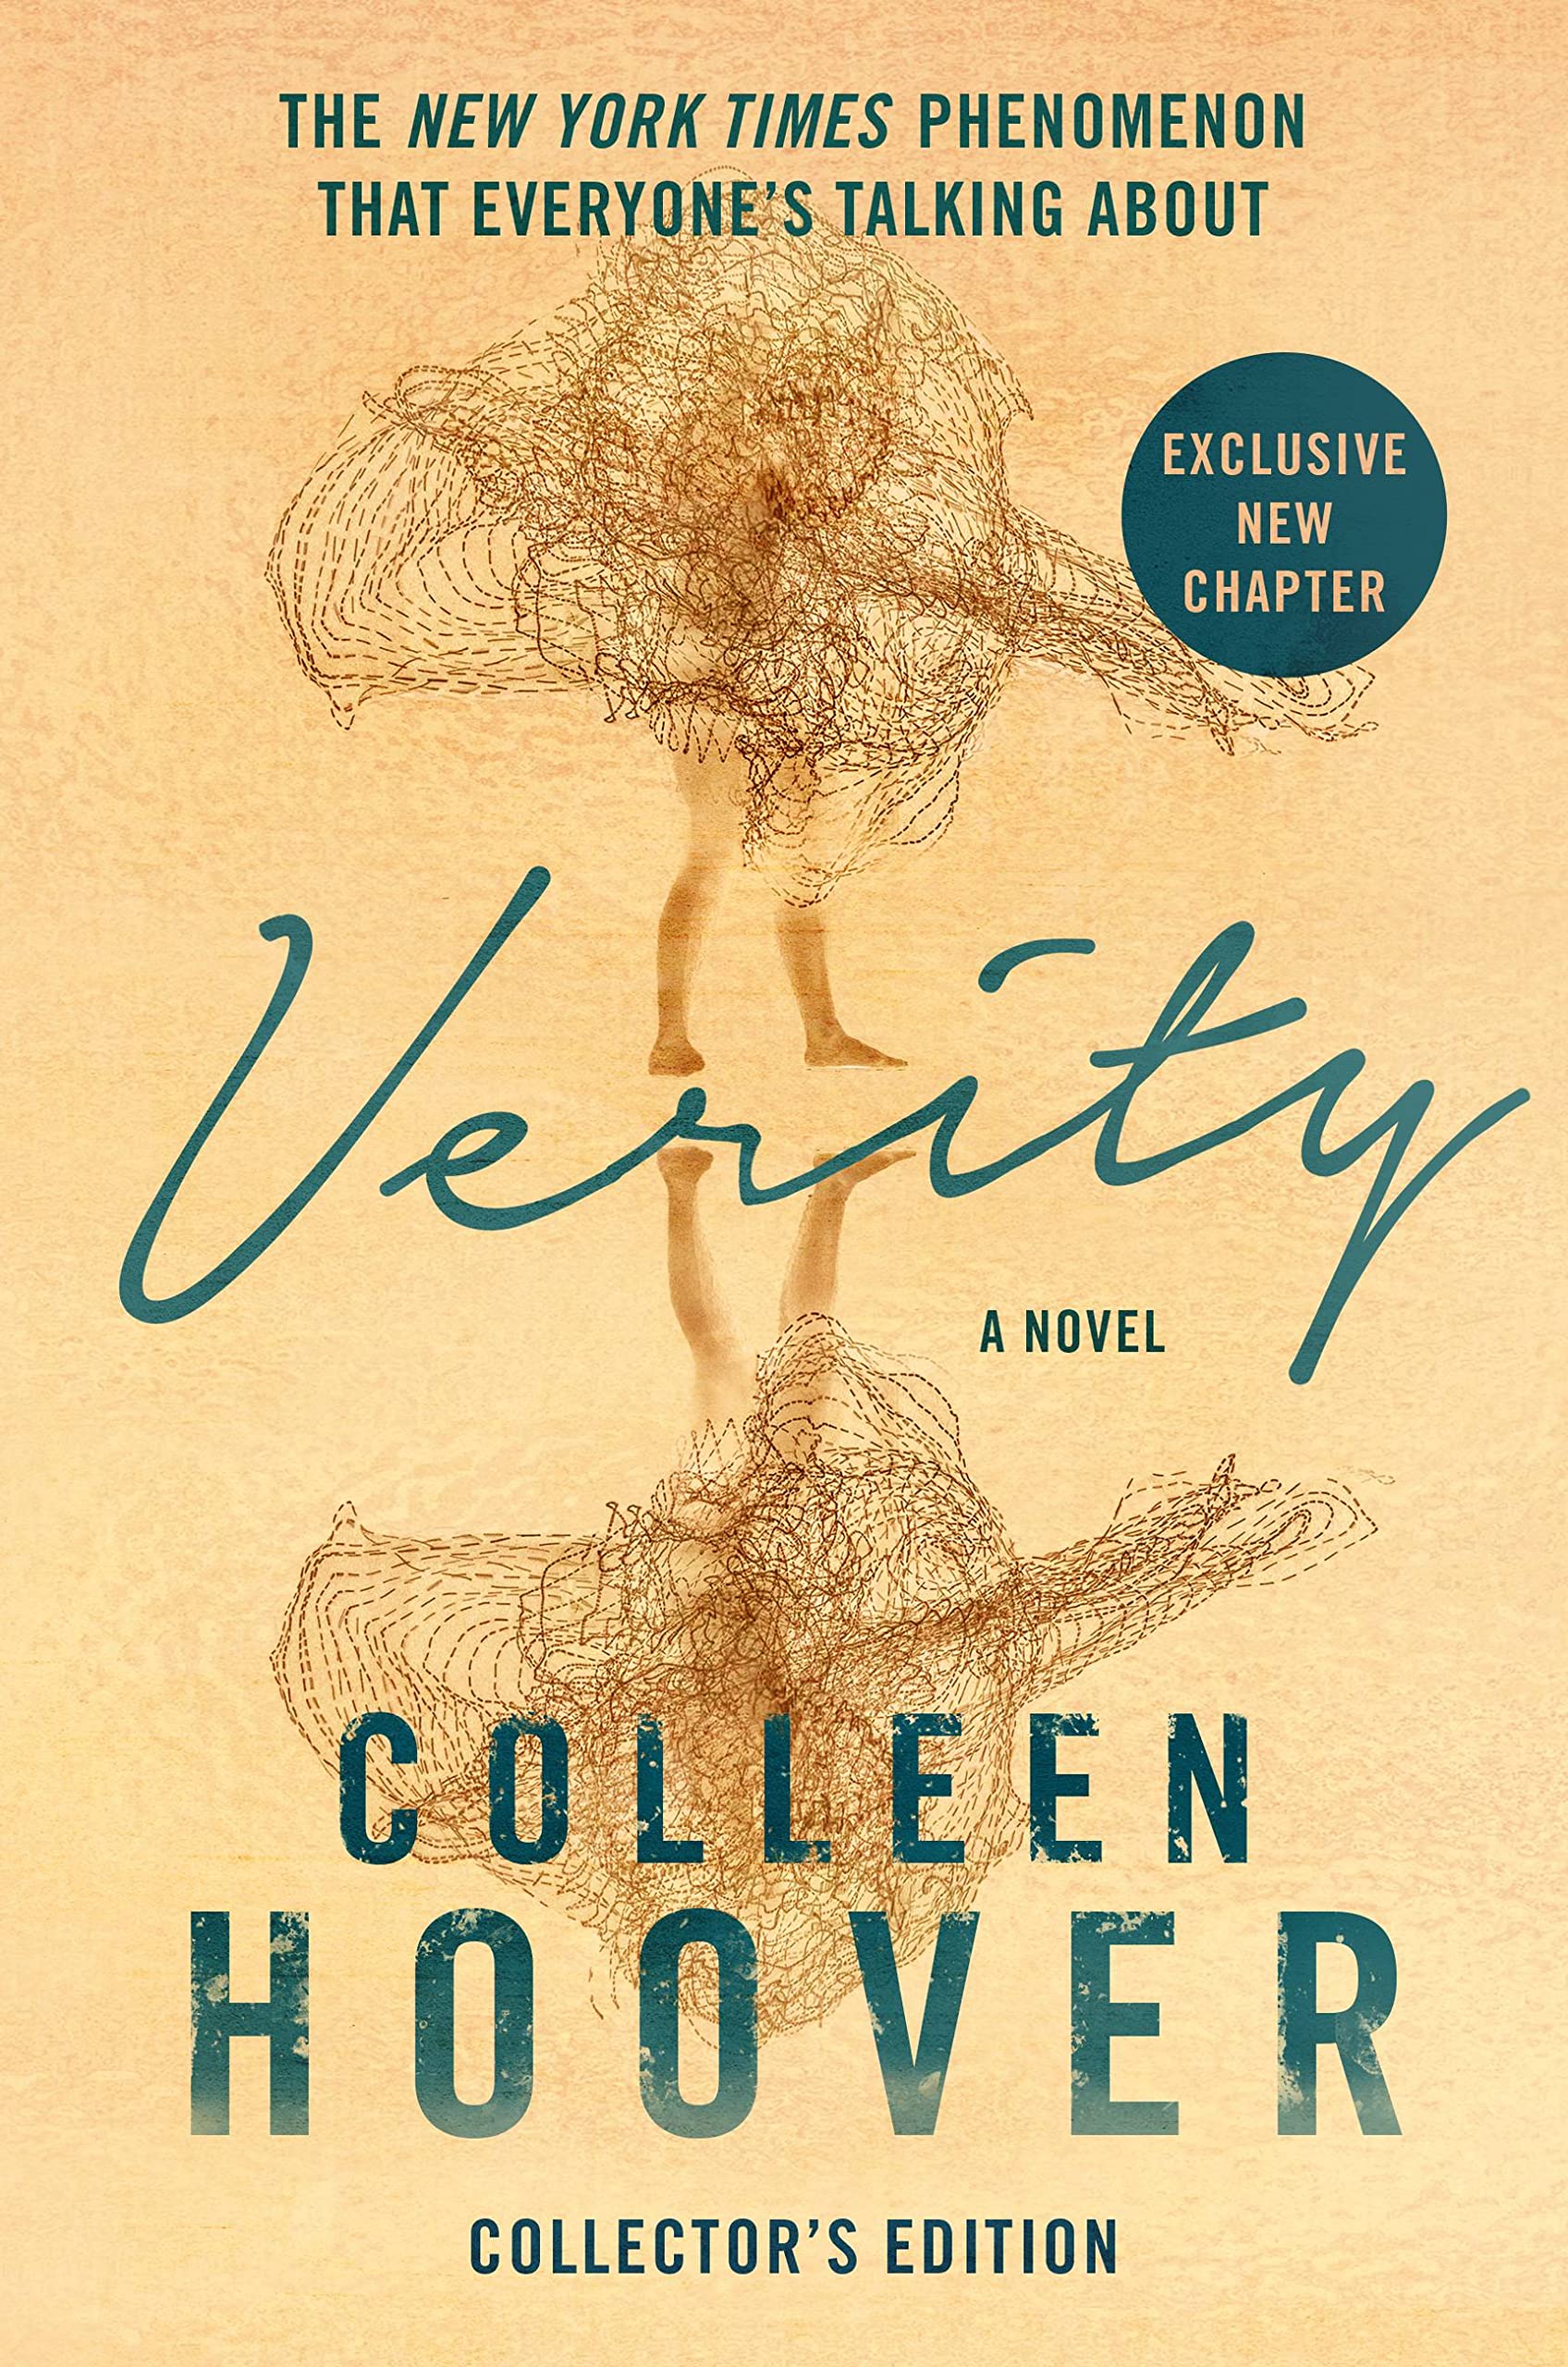 Verity Colleen Hoover [PDF] free Download